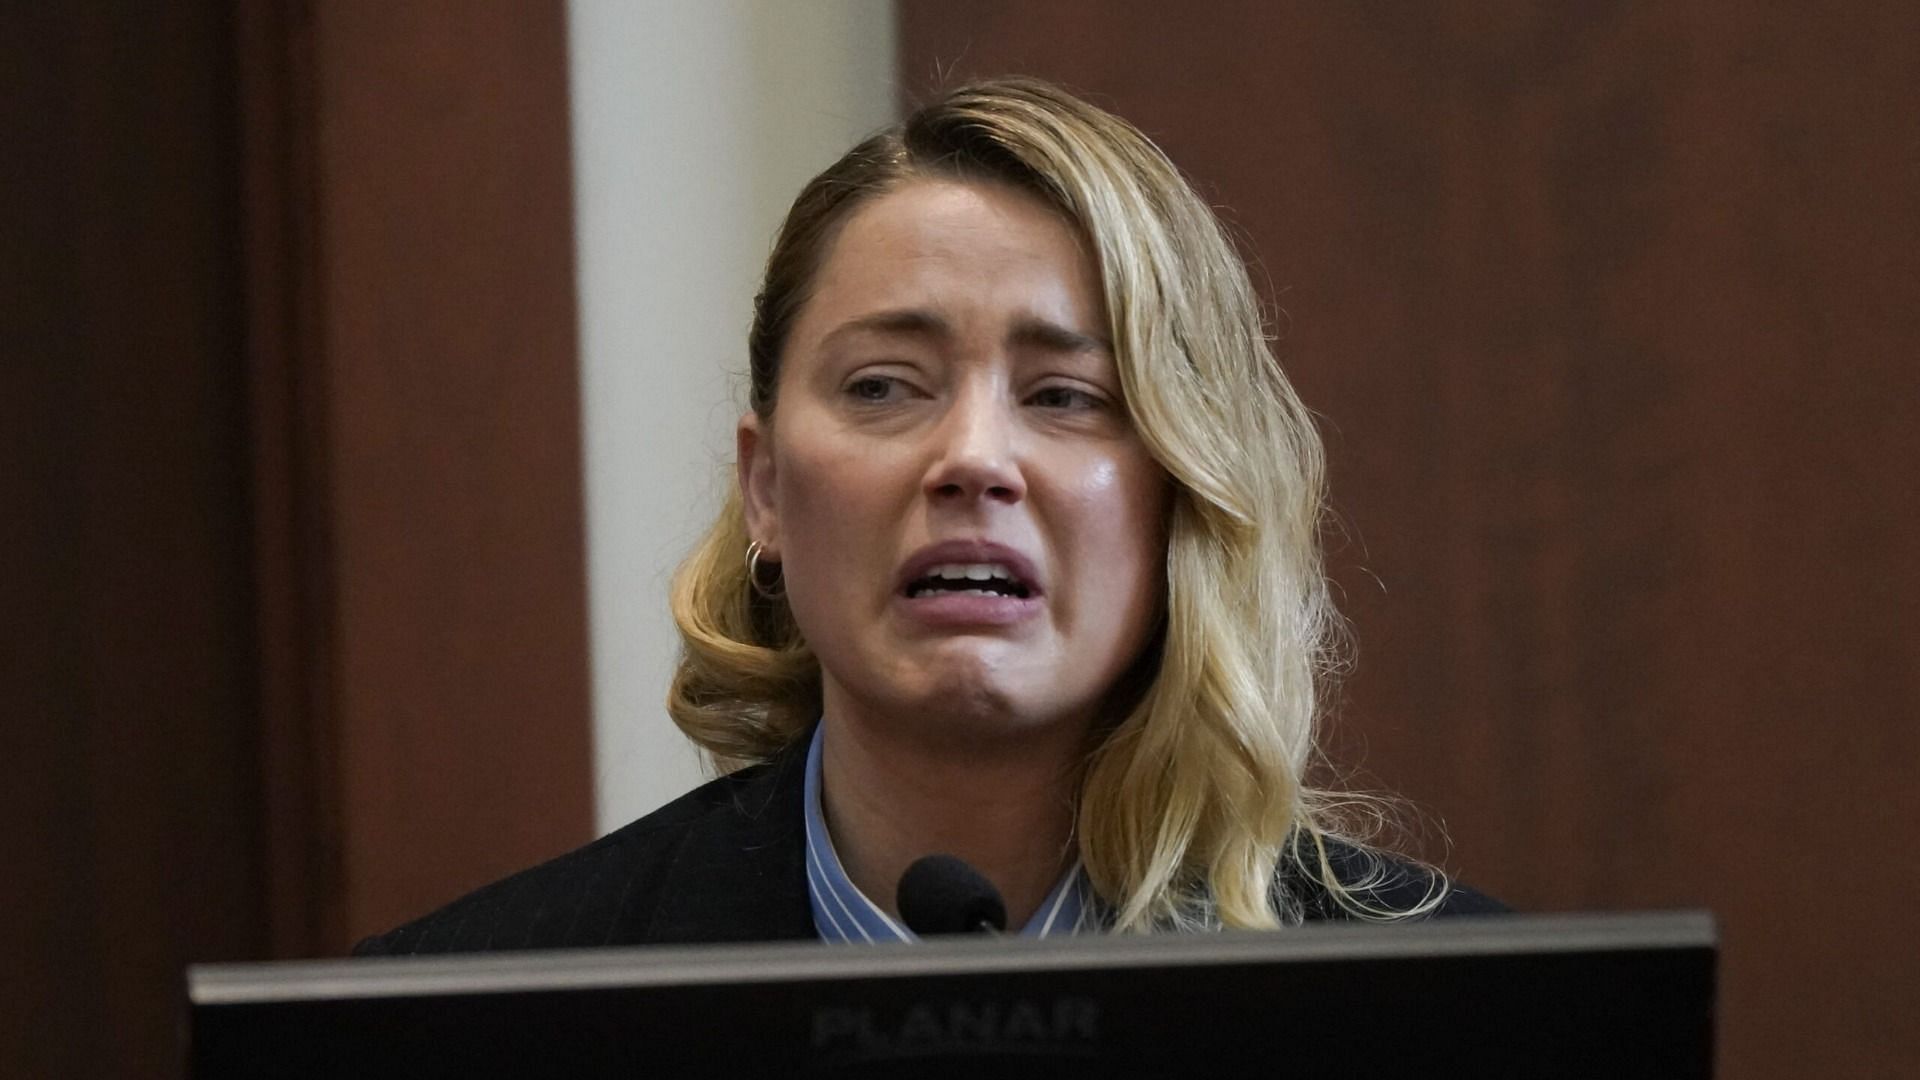 Amber Heard stated that she had filed for a temporary restraining order against Johnny Depp because she wanted to &quot;change her locks.&quot; (Image via Getty Images/Elizabeth Frantz)